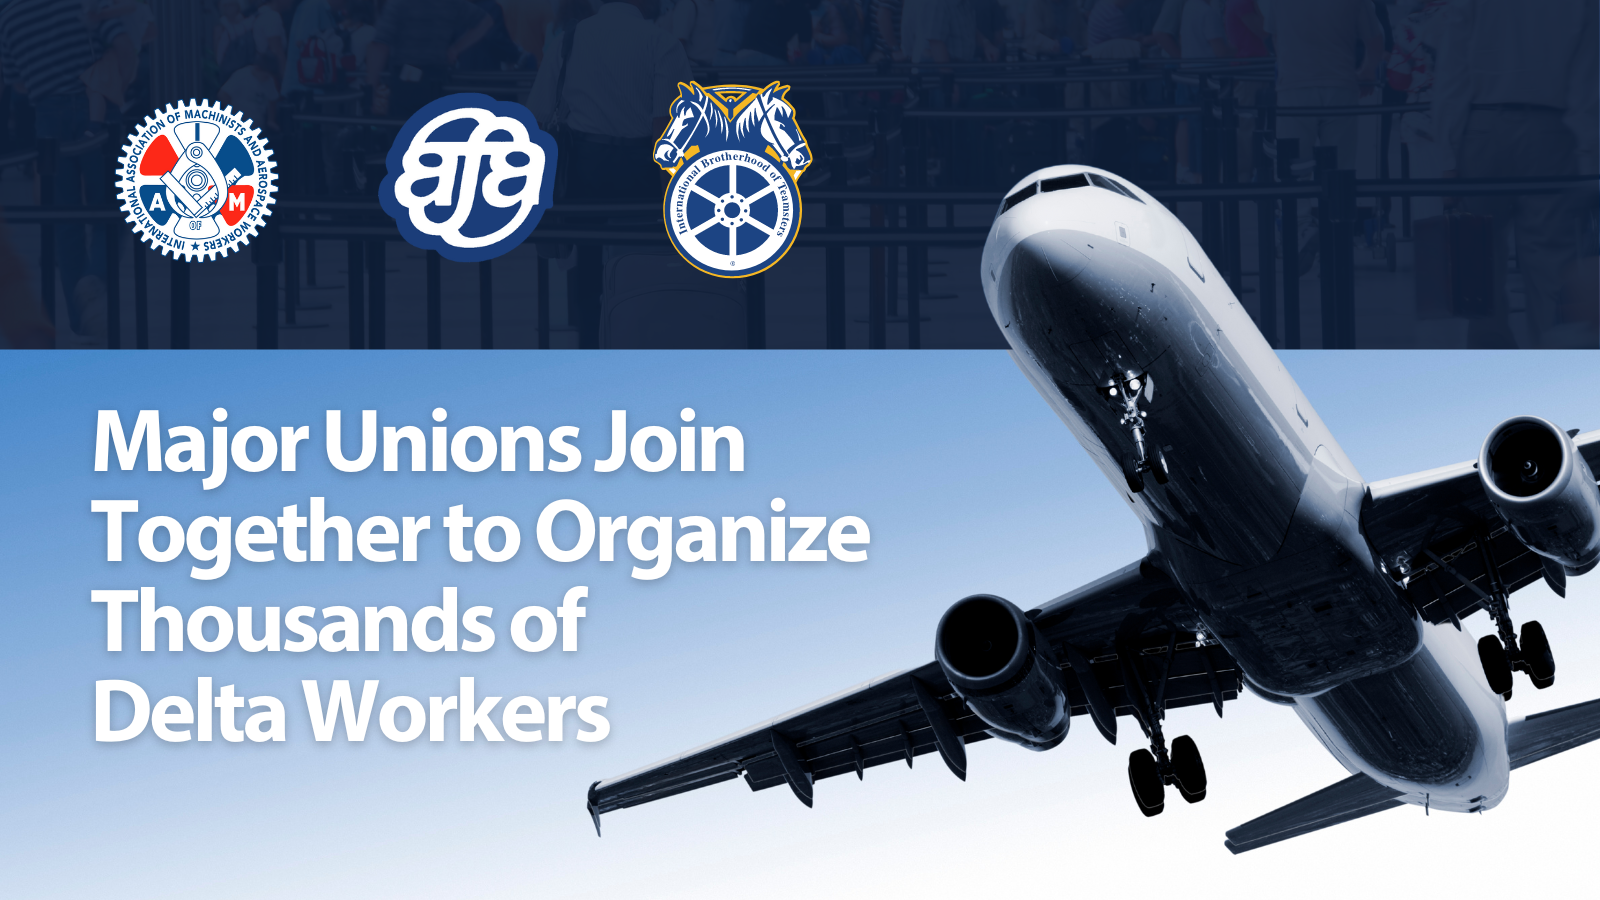 Organize and fly, together: Delta Workers Gain Full Support from Three Major Unions to Push for Representation of 45,000+ Workers